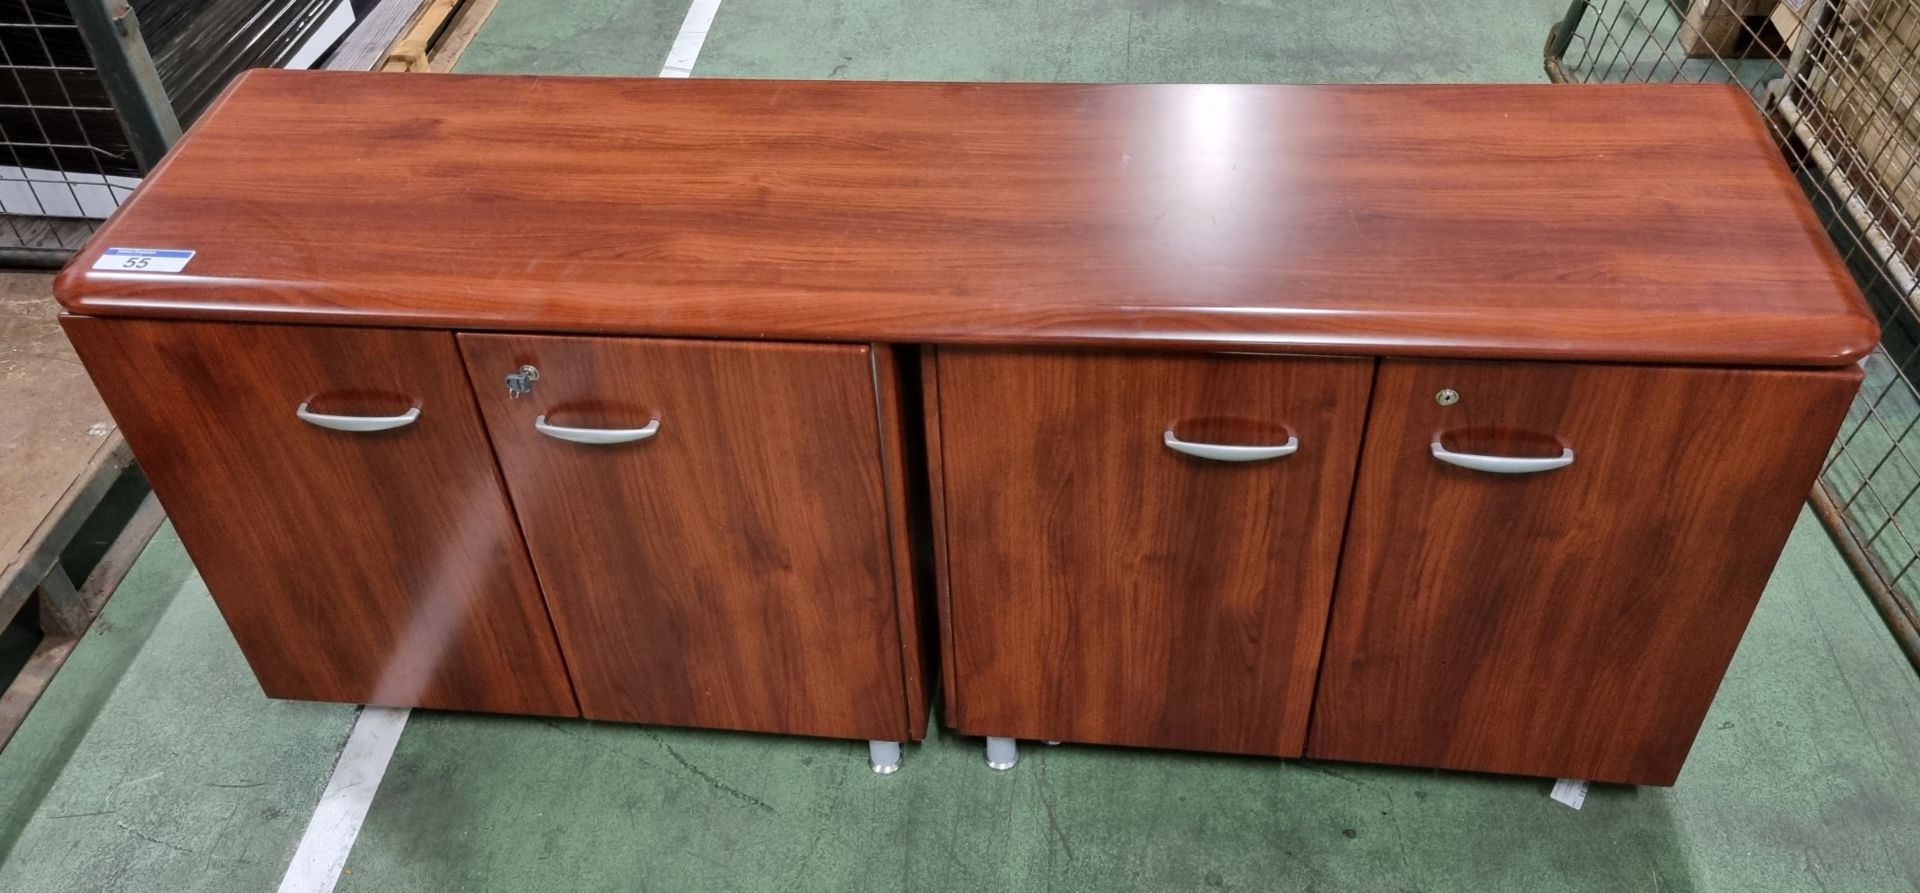 Rosewood 3 part sectional boardroom table on pedestal - L 2900 x W 1300mm - Image 3 of 15